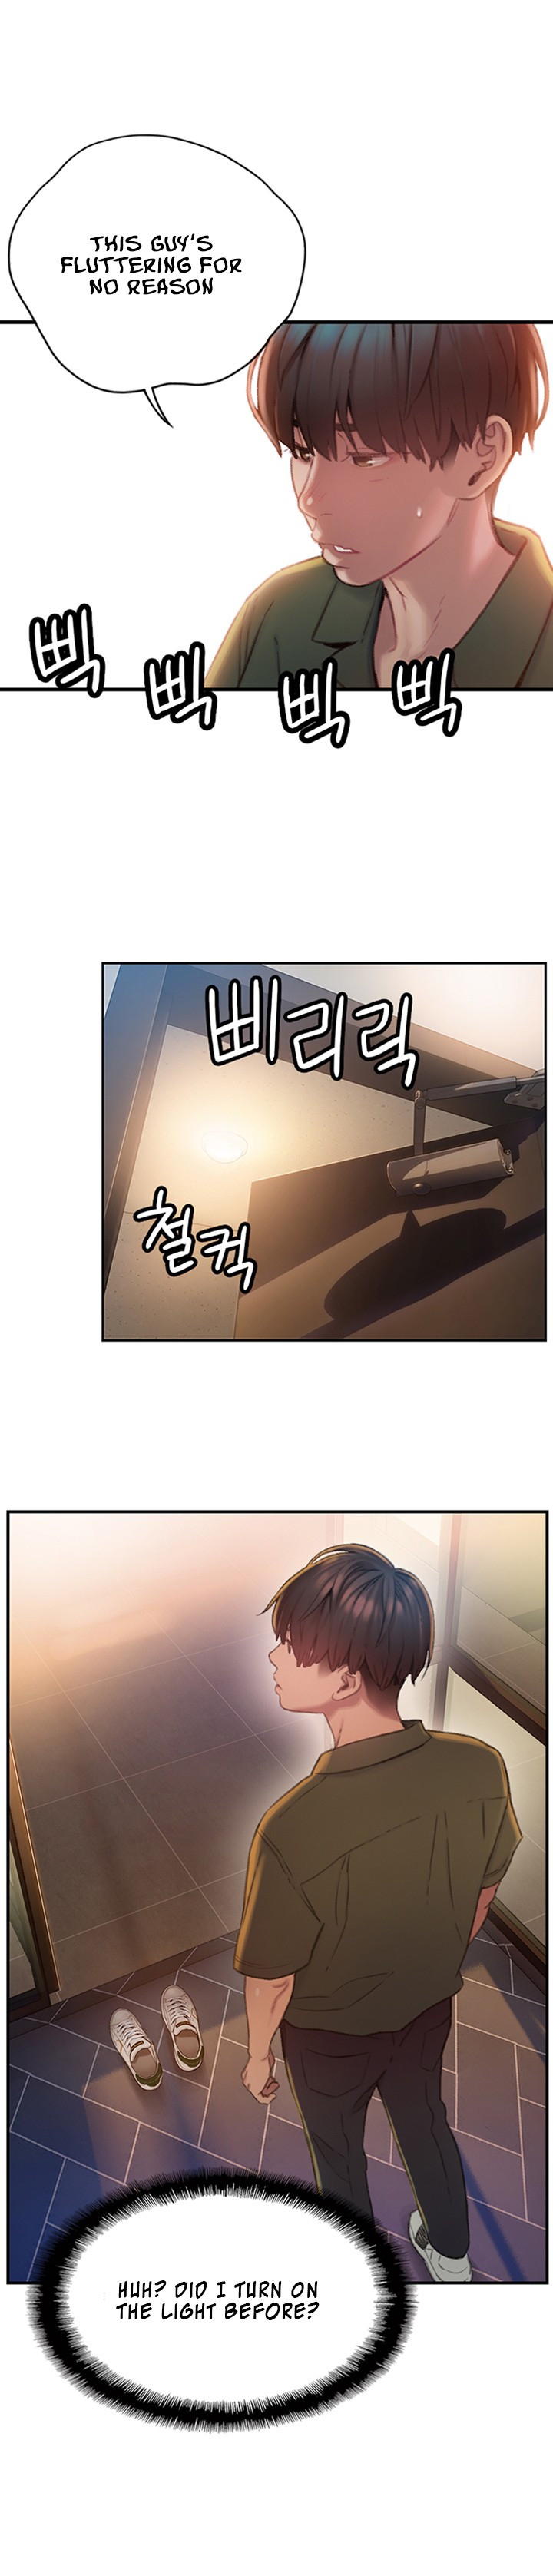 [Park Hyeongjun] Love Limit Exceeded (01-20) Ongoing - Page 31